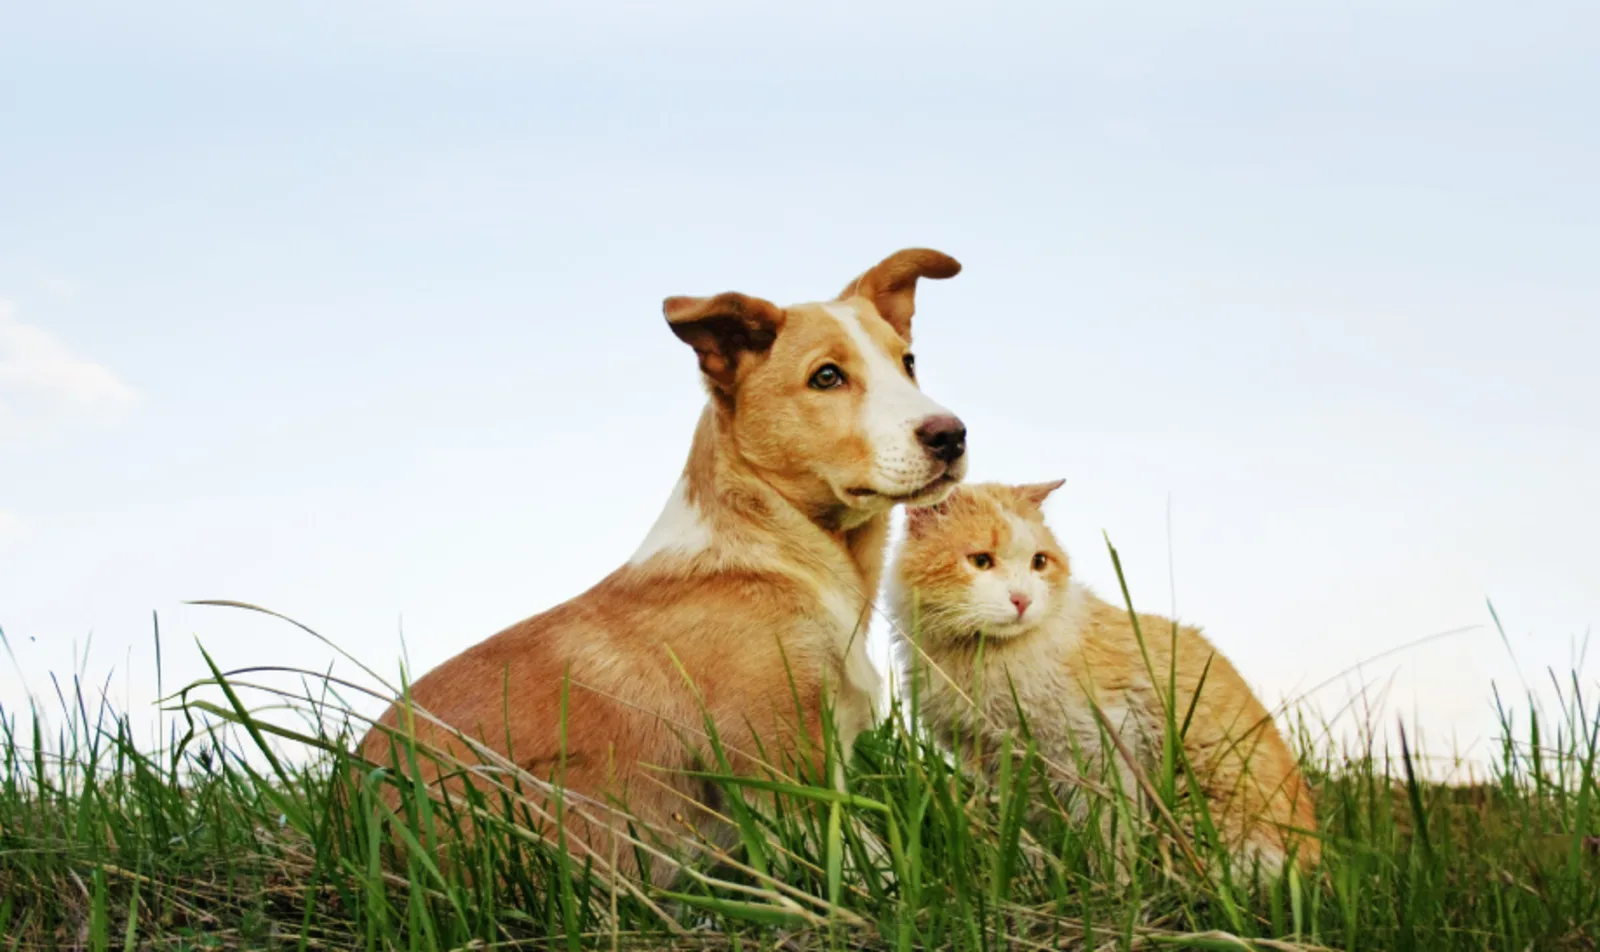 Dog and Cat sitting together on green grass with blue sky above them